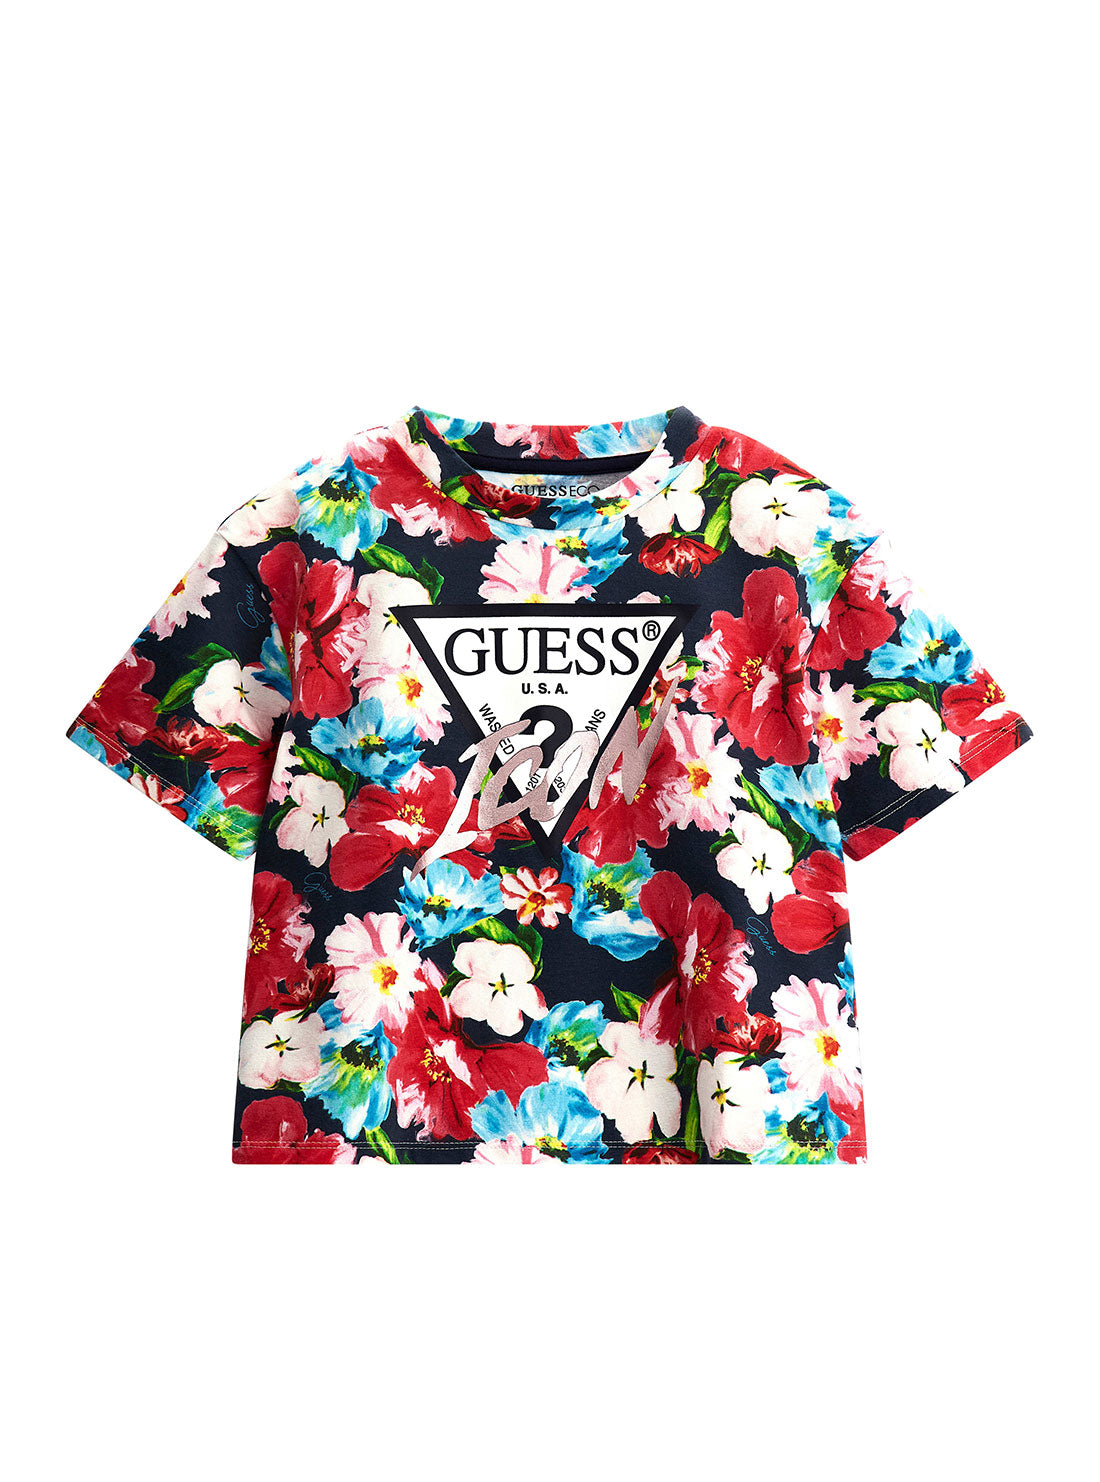 GUESS Floral Short Sleeve T-Shirt (2-7) front view